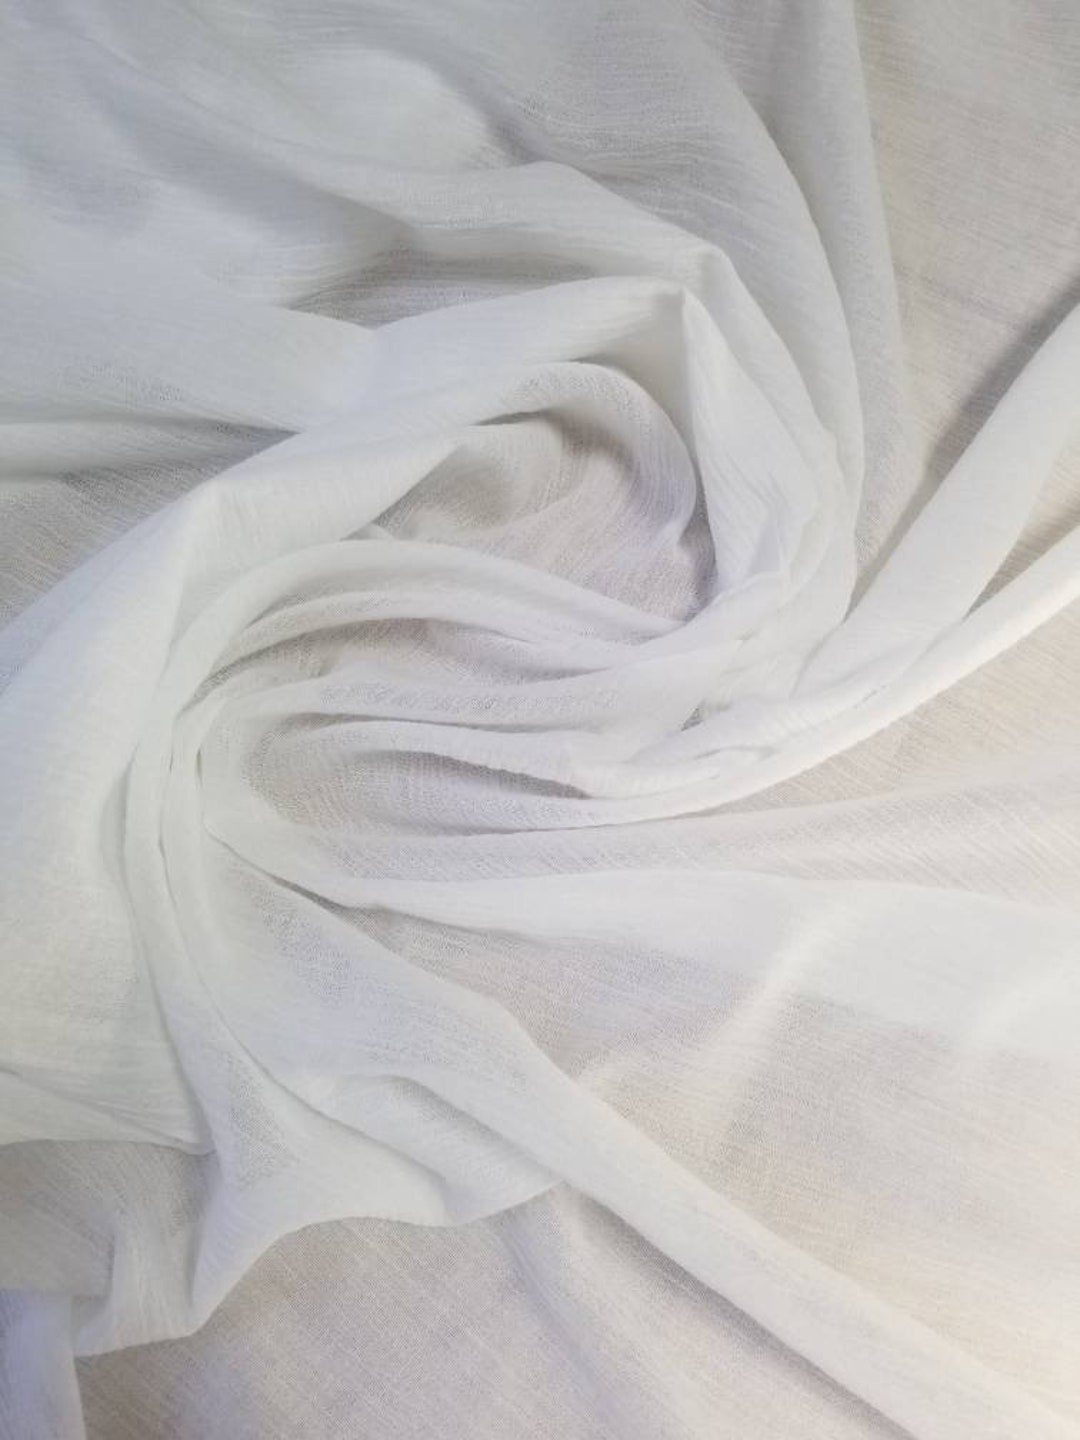 Cotton Guaze Fabric is Translucent in Nature, Thin With a Loose Weave ...